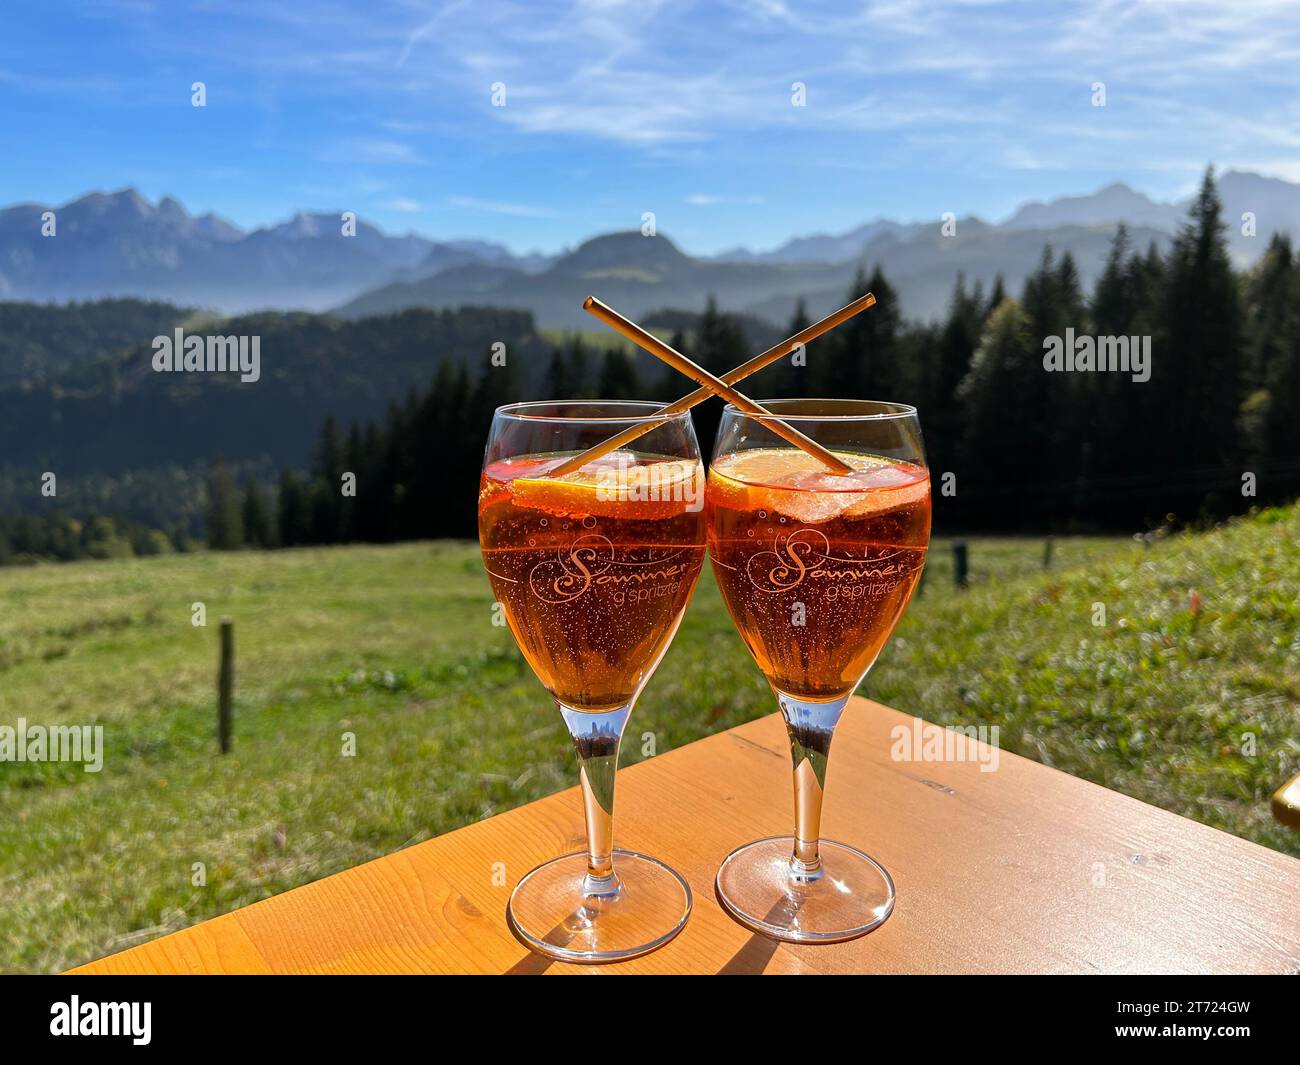 The two drinks in glasses on a table, with a mountainous landscape in the background in Unken, Austria Stock Photo